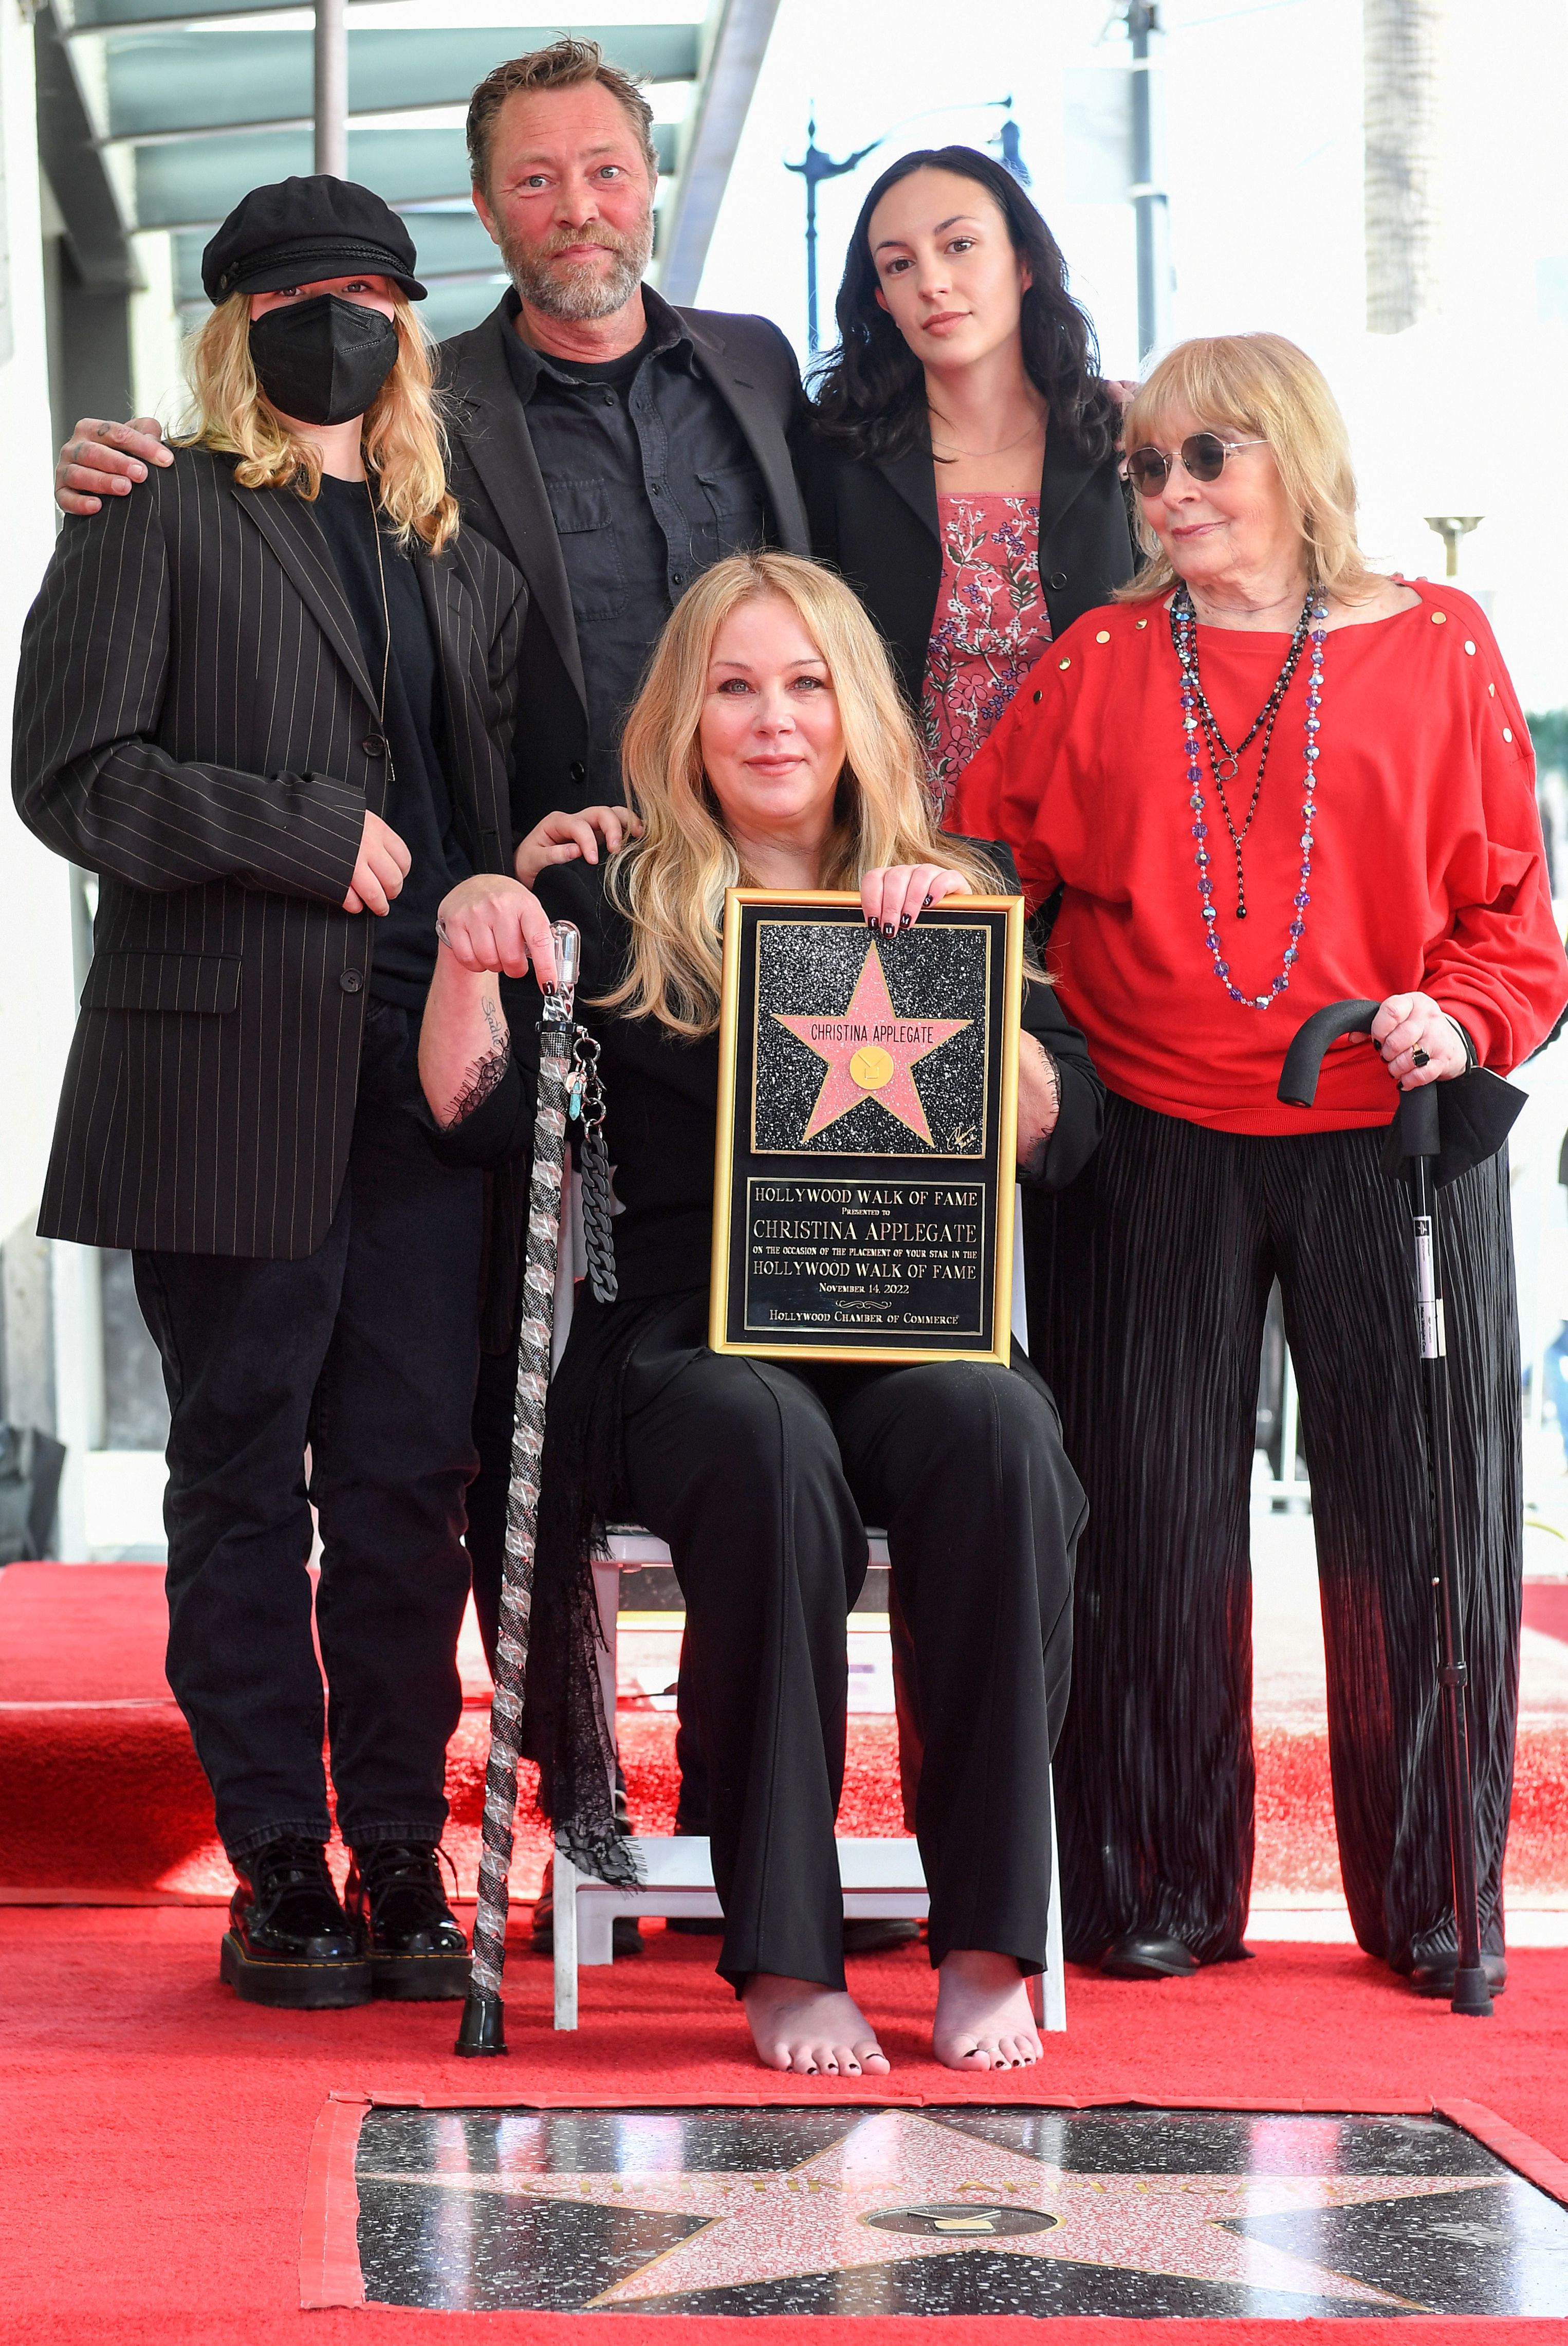 Sadie Grace LeNoble, Martyn LeNoble, Christina Applegate, guest, and Nancy Priddy pose with Christina Applegate's star during the Hollywood Walk of Fame Ceremony in Los Angeles, California, on November 14, 2022. | Source: Getty Images